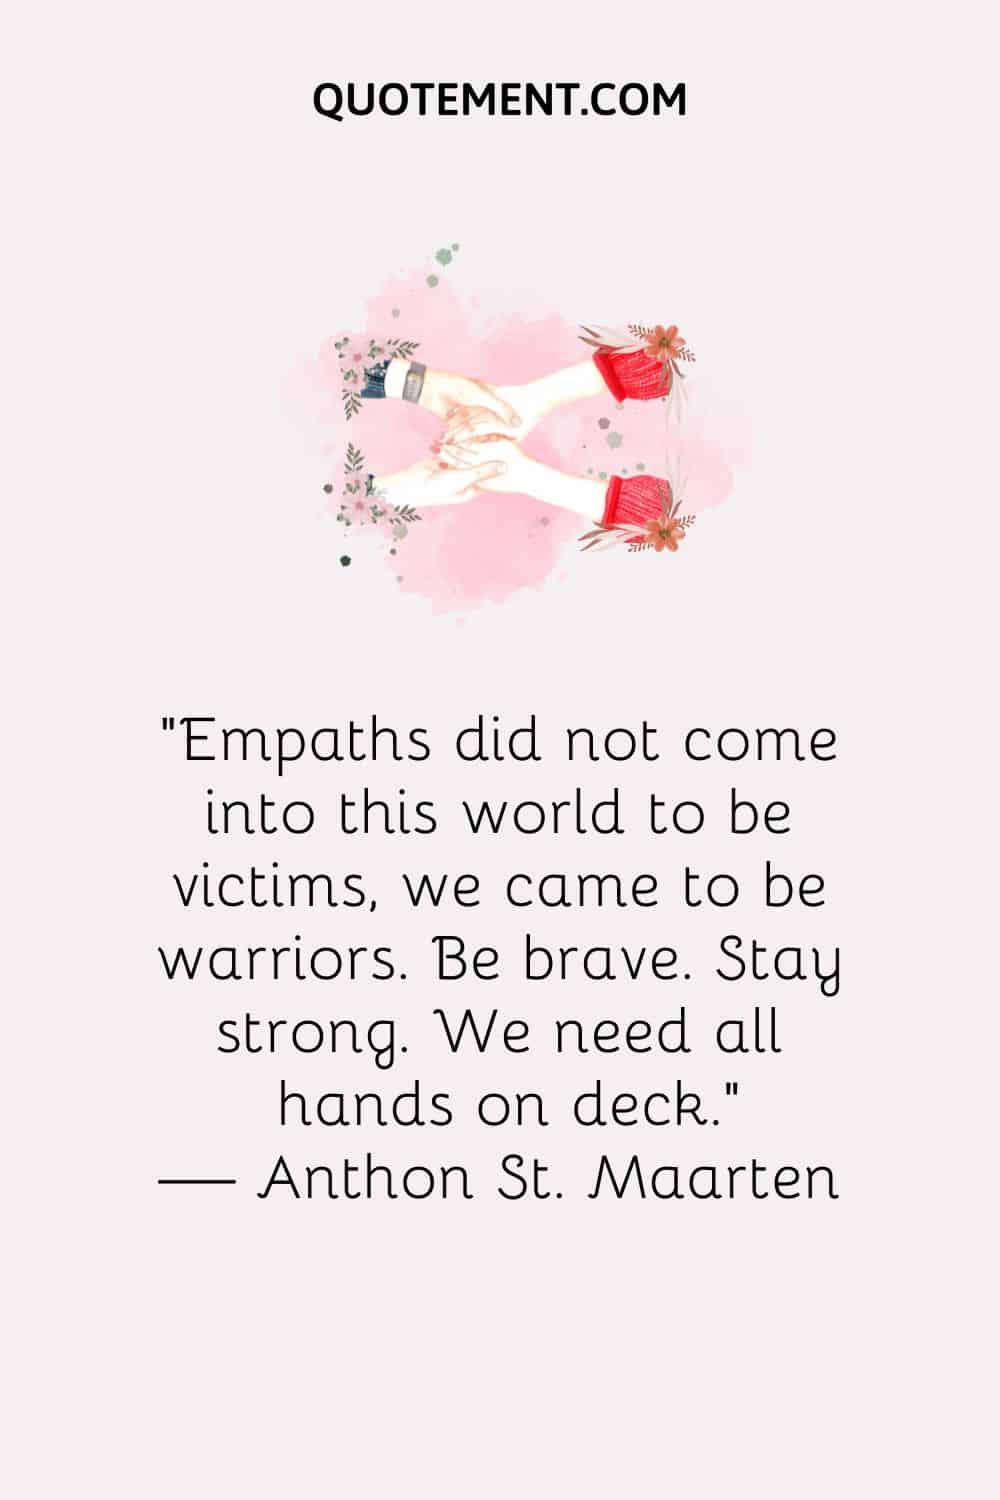 Empaths did not come into this world to be victims, we came to be warriors. Be brave. Stay strong. We need all hands on deck